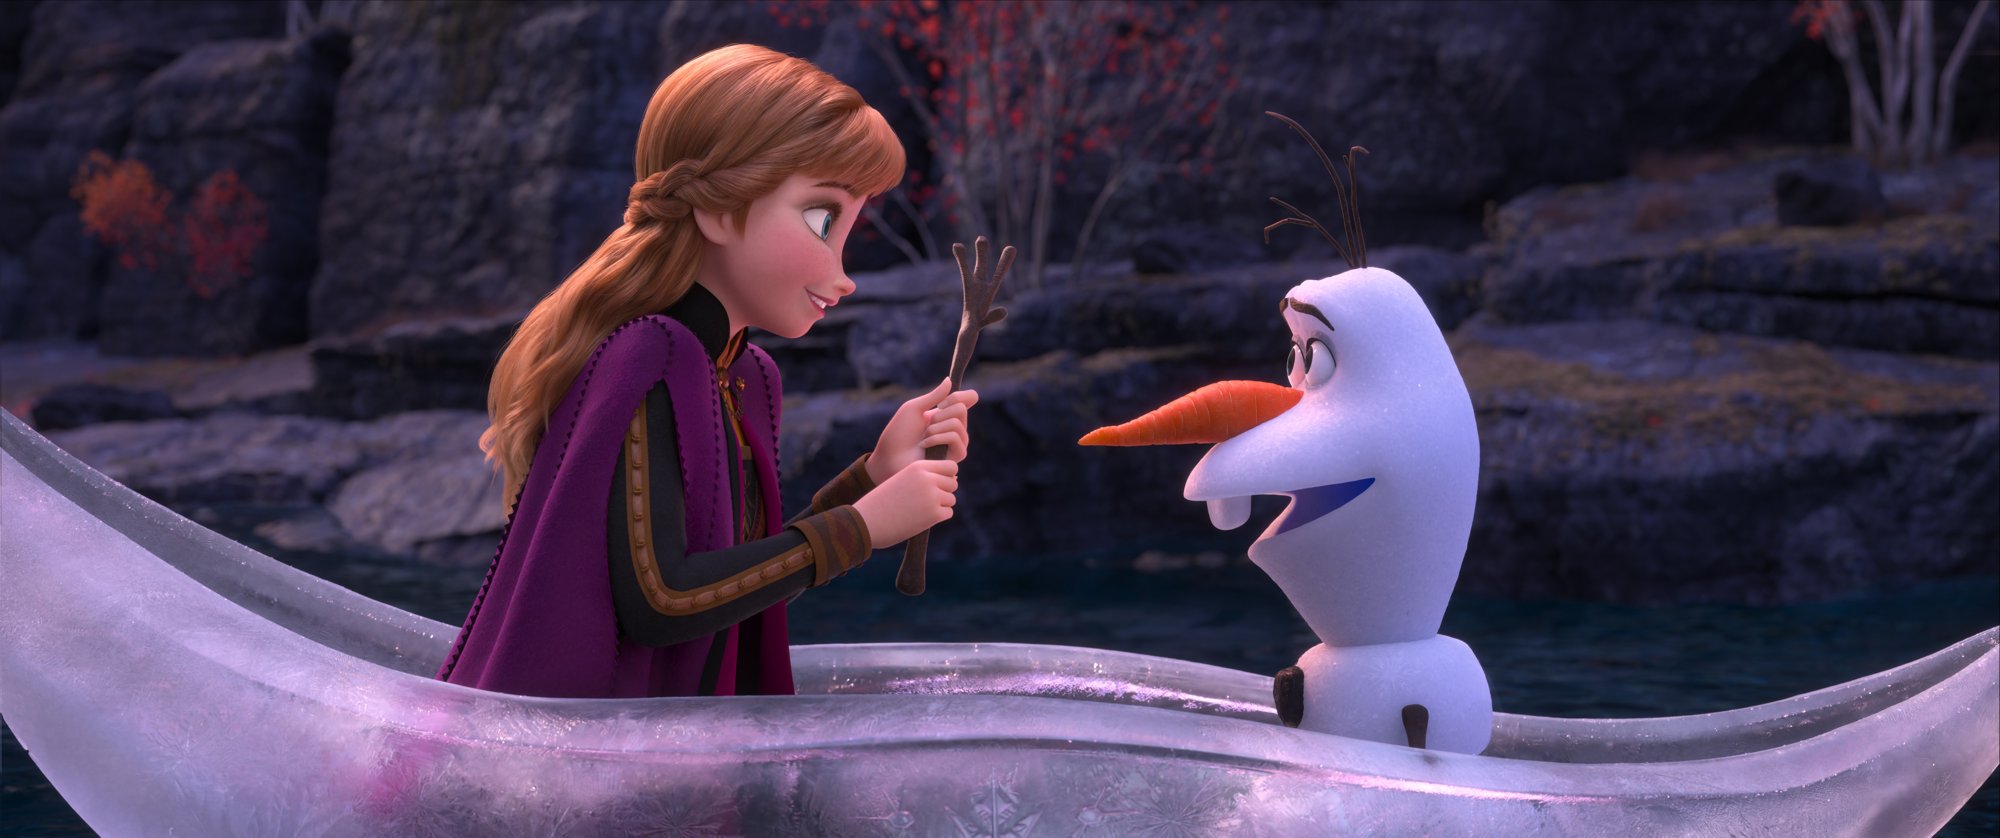 Anna and Olaf from Walt Disney Pictures' Frozen II (2019)